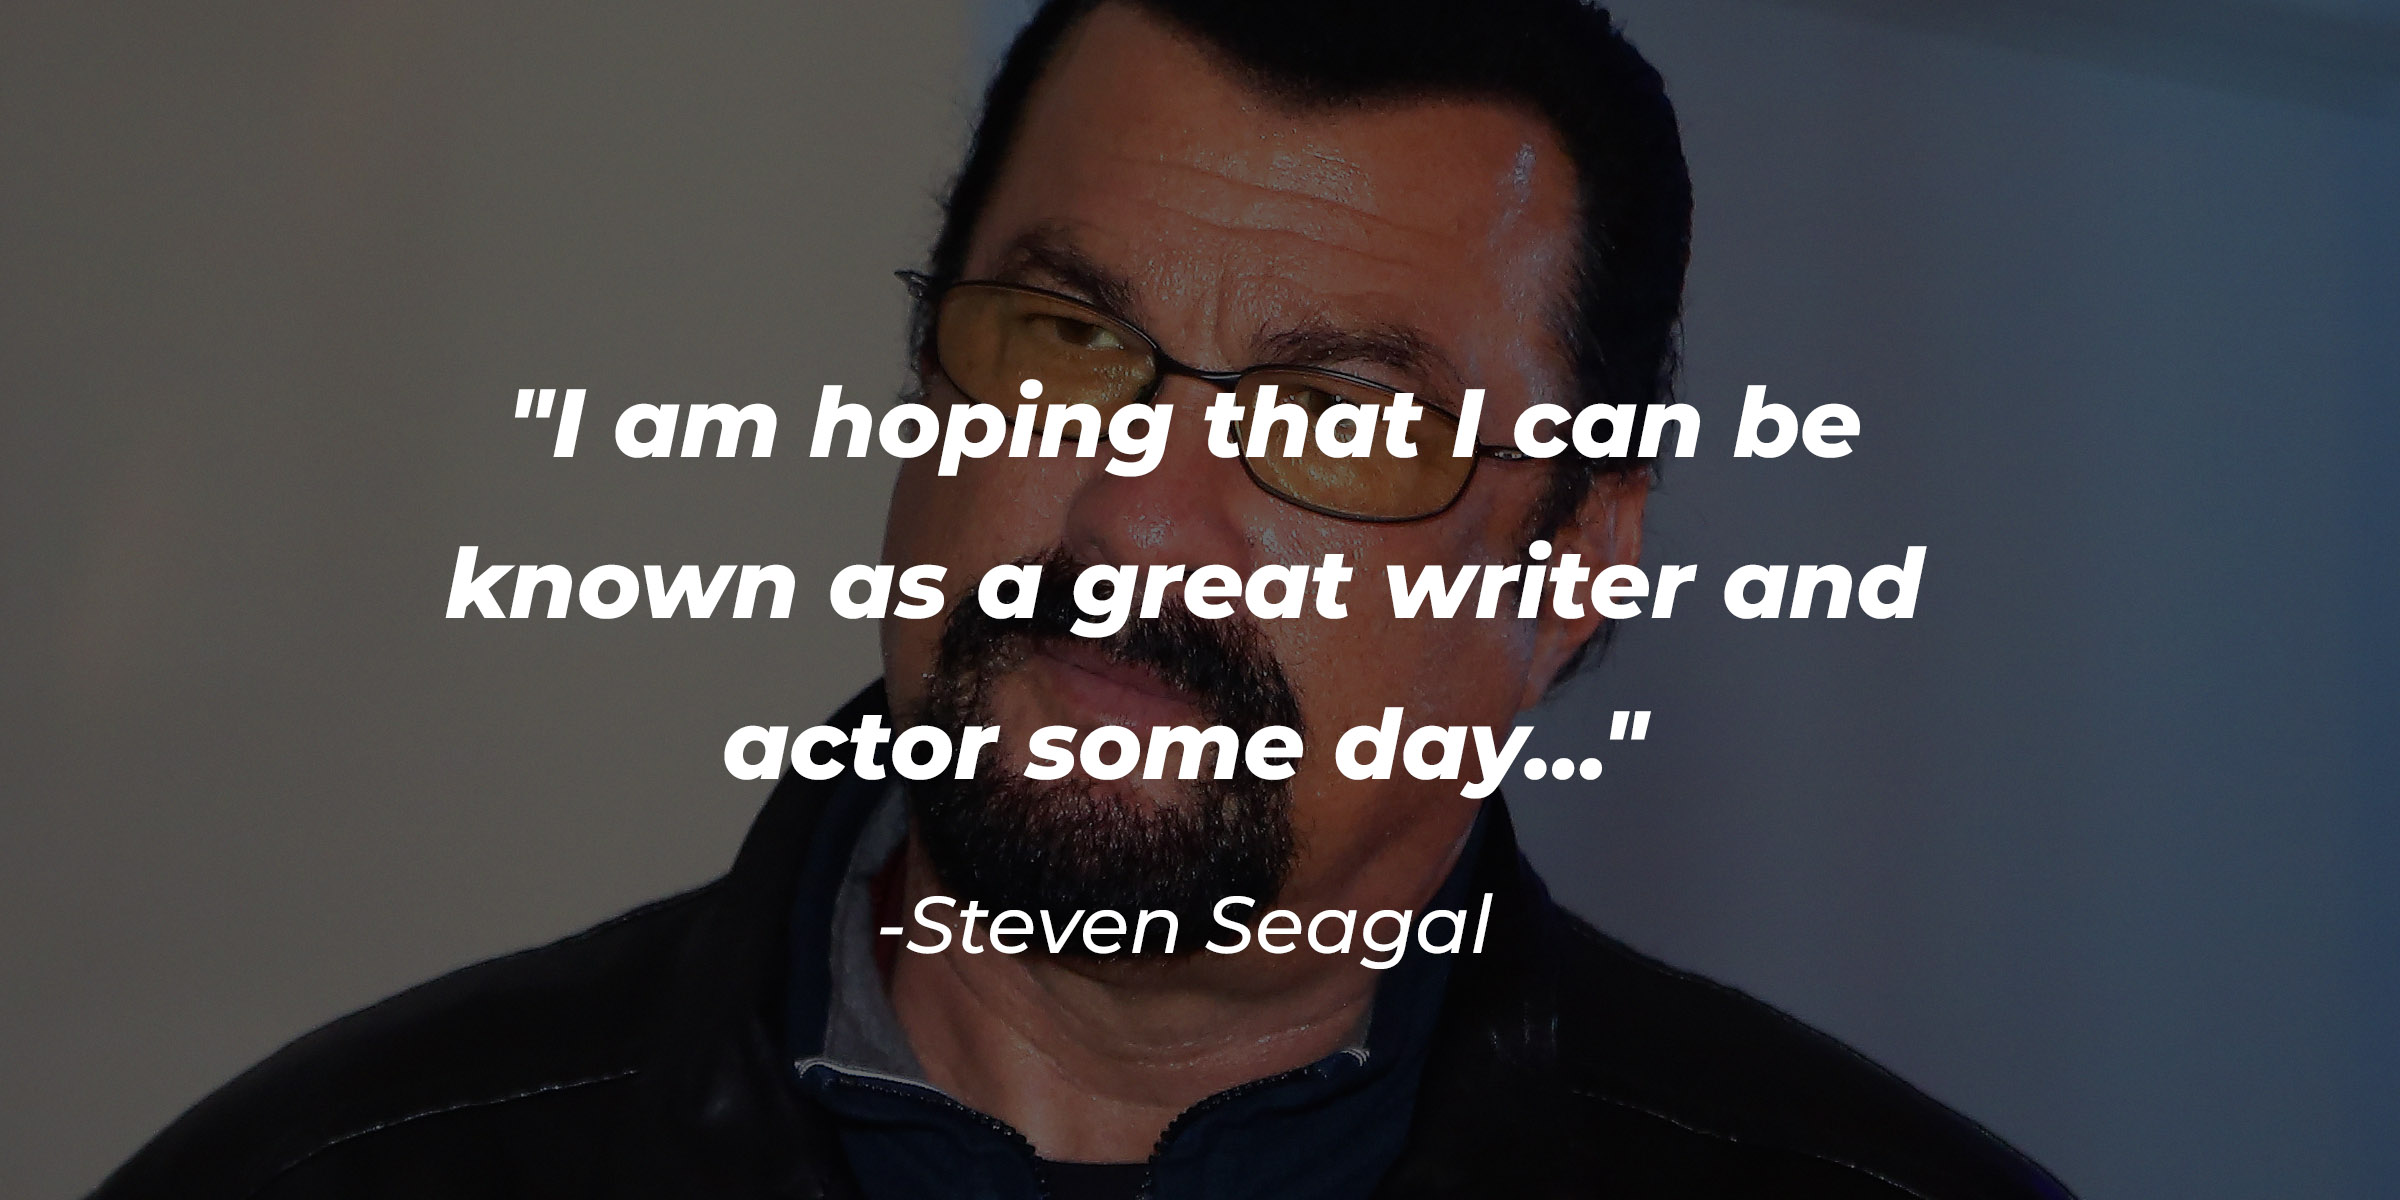 Steven Seagal’s quote: "I am hoping that I can be known as a great writer and actor some day…" | Source: Getty Images